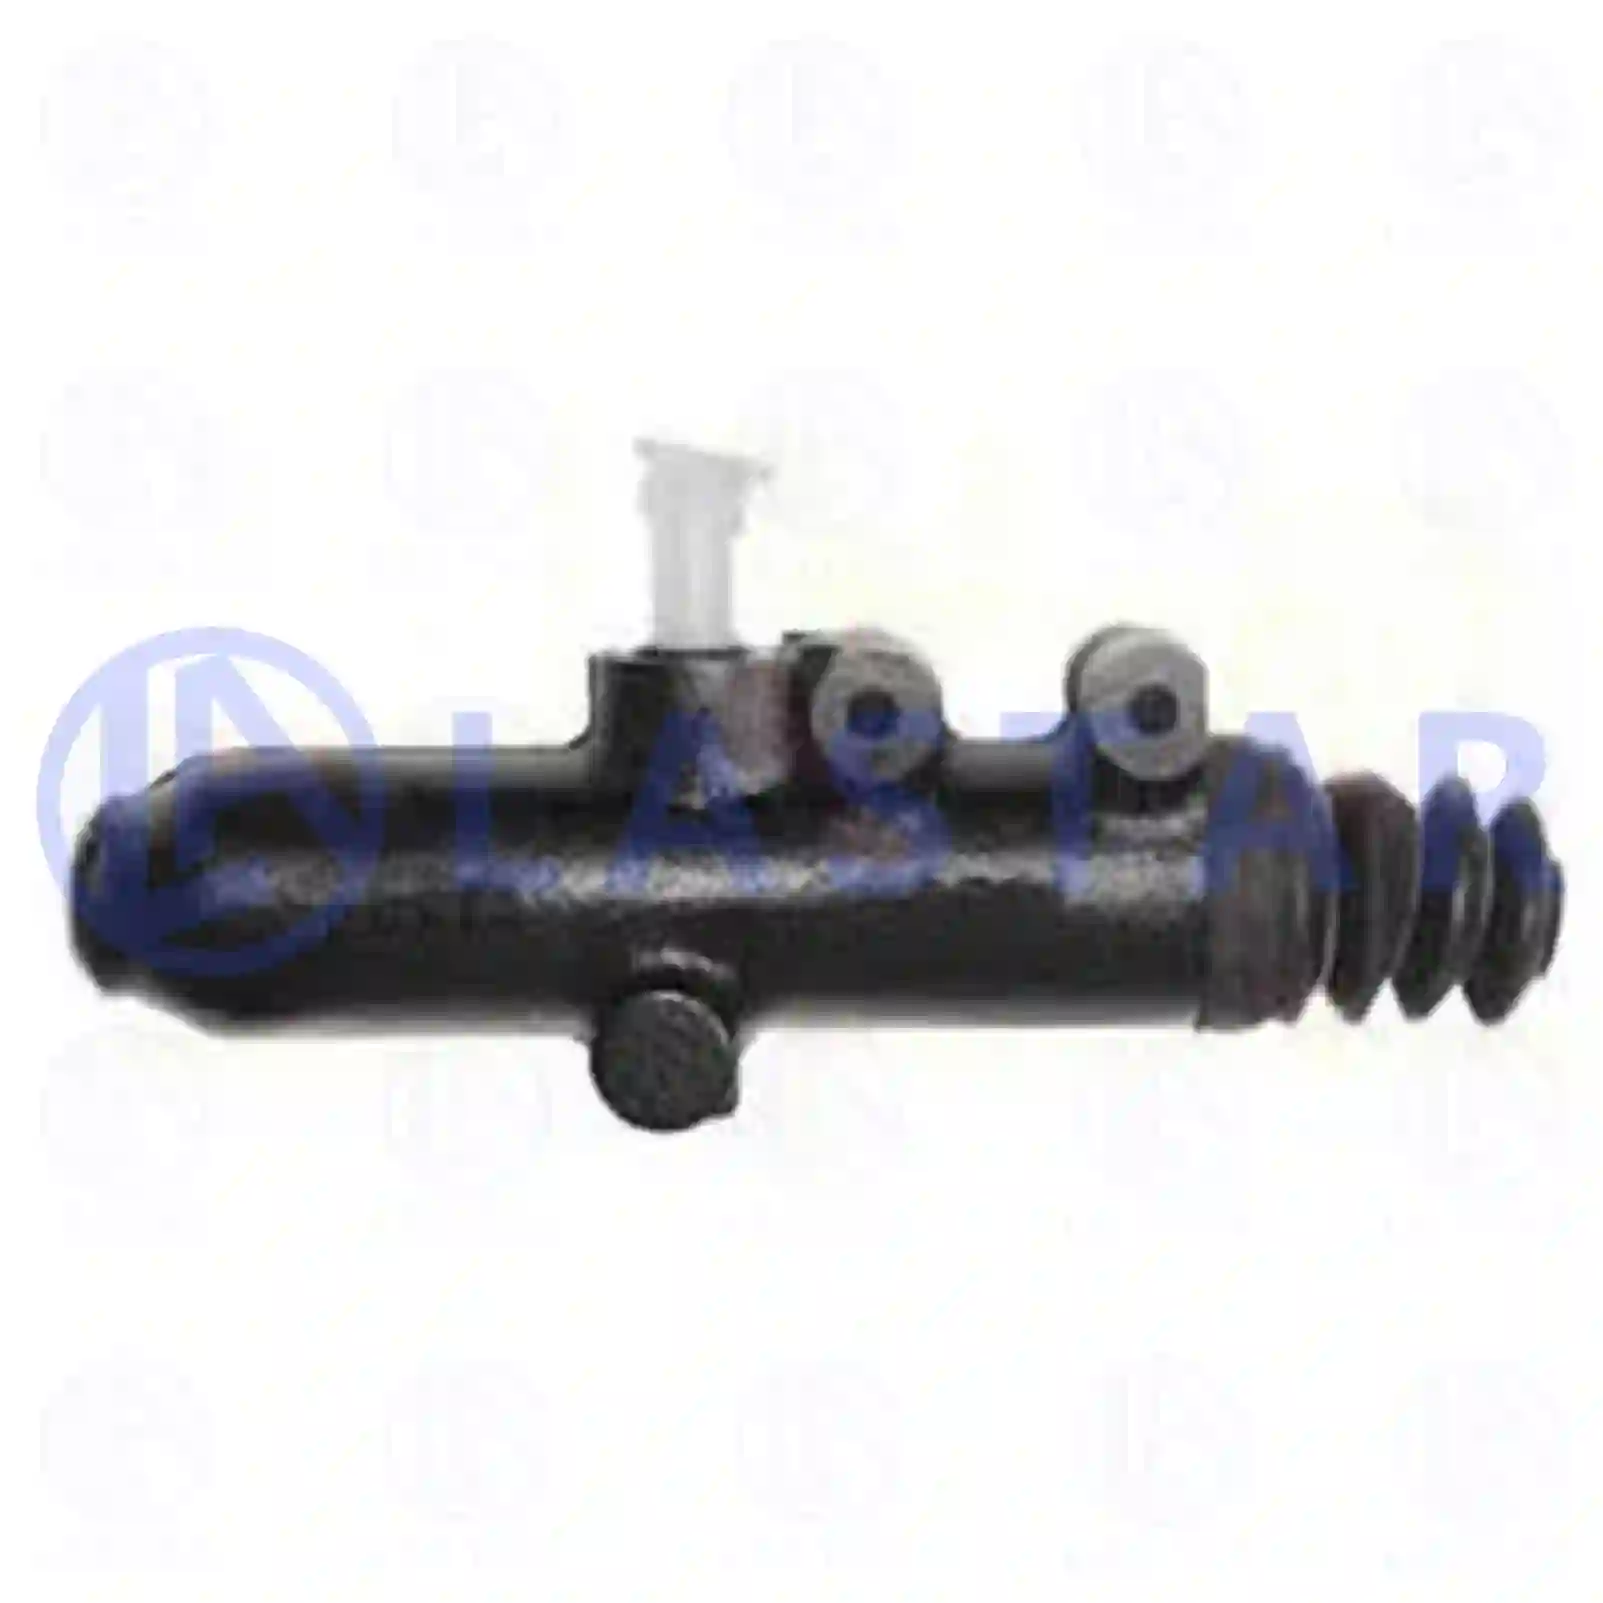 Clutch cylinder, 77722385, N1011009929, 0012950806, 0012953006, 011009929, 040323800 ||  77722385 Lastar Spare Part | Truck Spare Parts, Auotomotive Spare Parts Clutch cylinder, 77722385, N1011009929, 0012950806, 0012953006, 011009929, 040323800 ||  77722385 Lastar Spare Part | Truck Spare Parts, Auotomotive Spare Parts